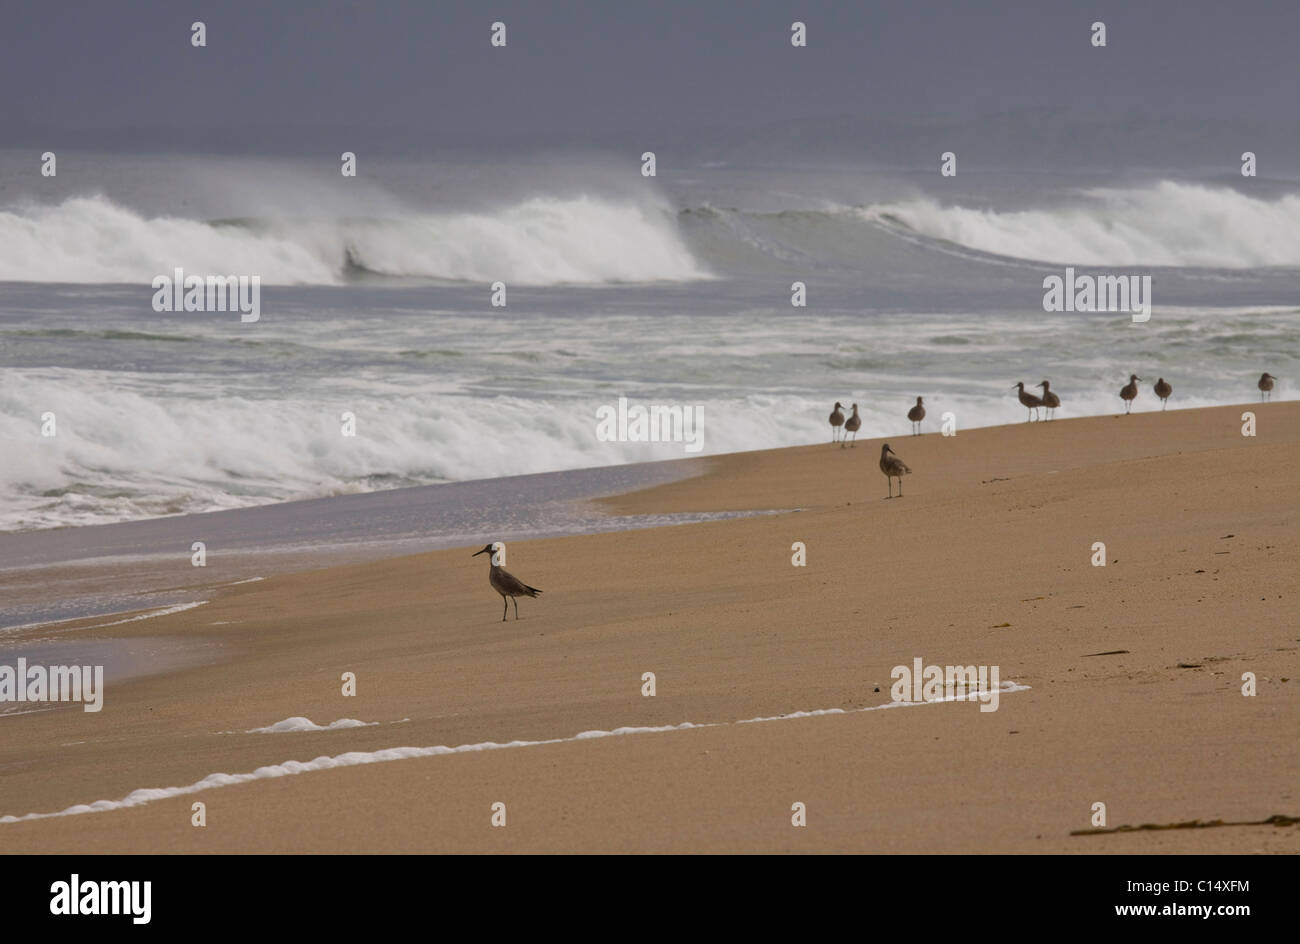 Shore birds, possibly Dowitchers, walk along the surf of Monterey Bay, Central California, USA Stock Photo